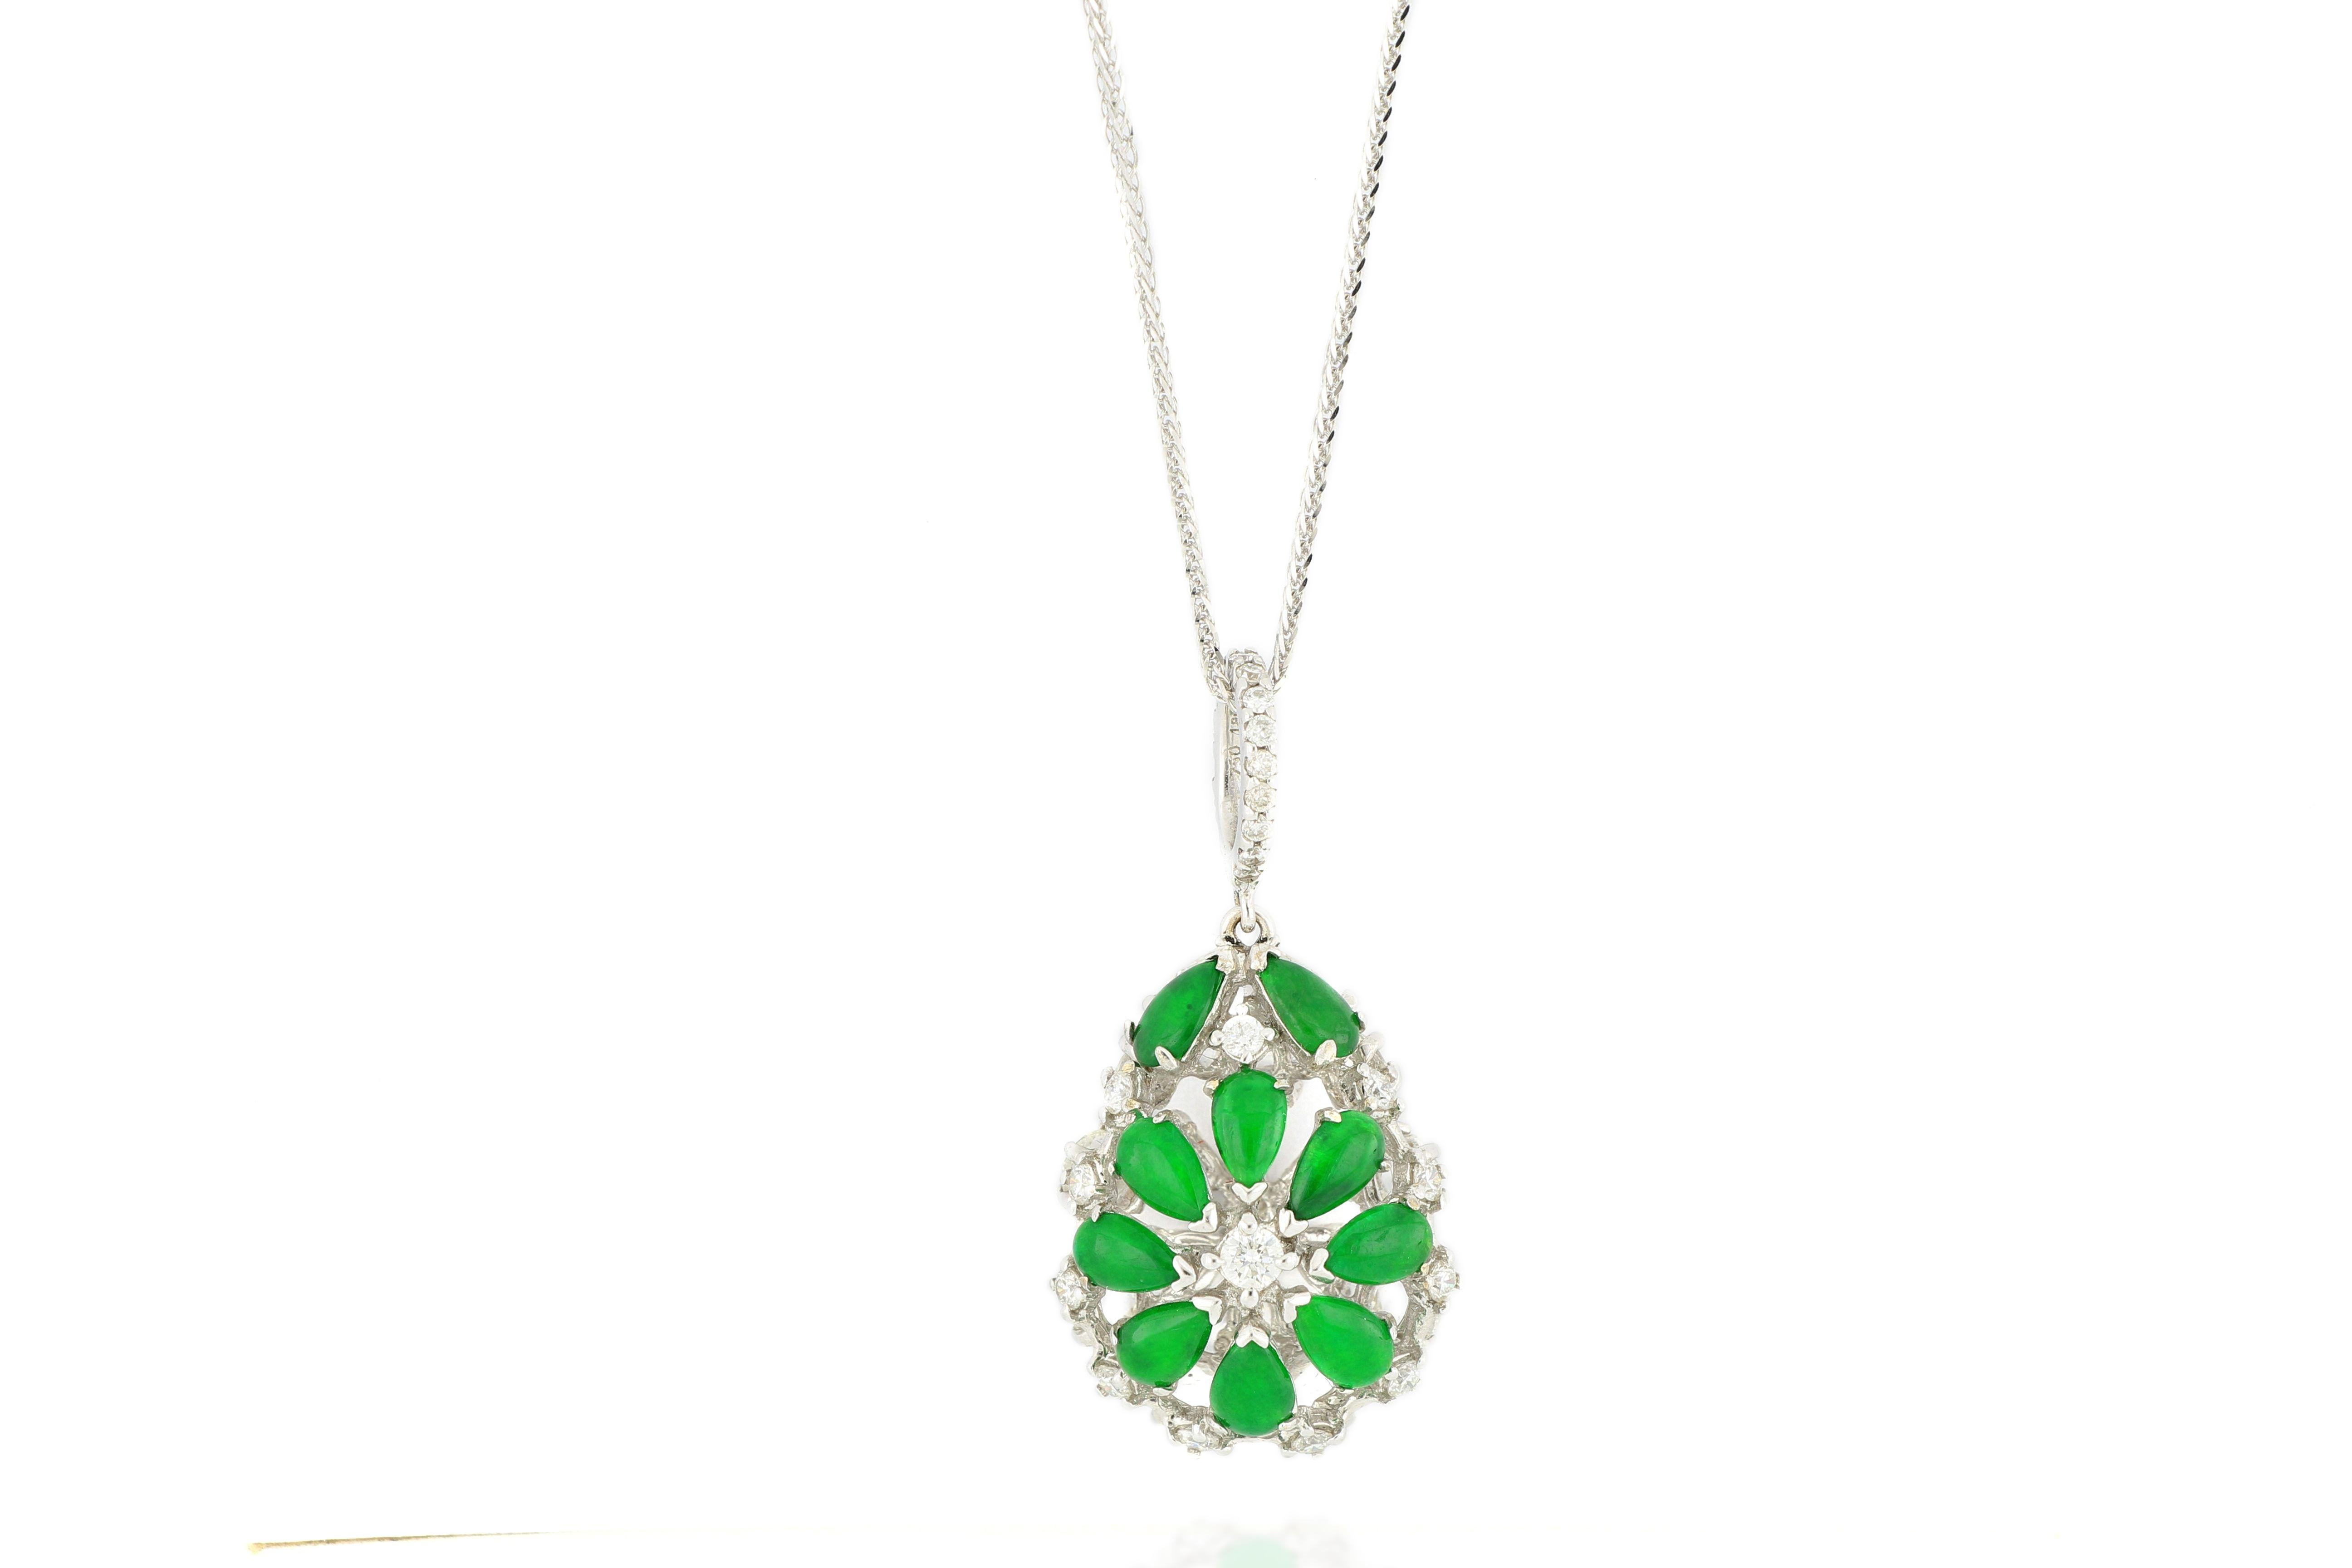 This is a very beautiful and unique 2-sided pendant, composed of 10 pieces of pear-shaped intense emerald green jadeite cabochon of very good translucency on one side, decorated with round brilliant-cut and rose-cut diamonds on both sides, total